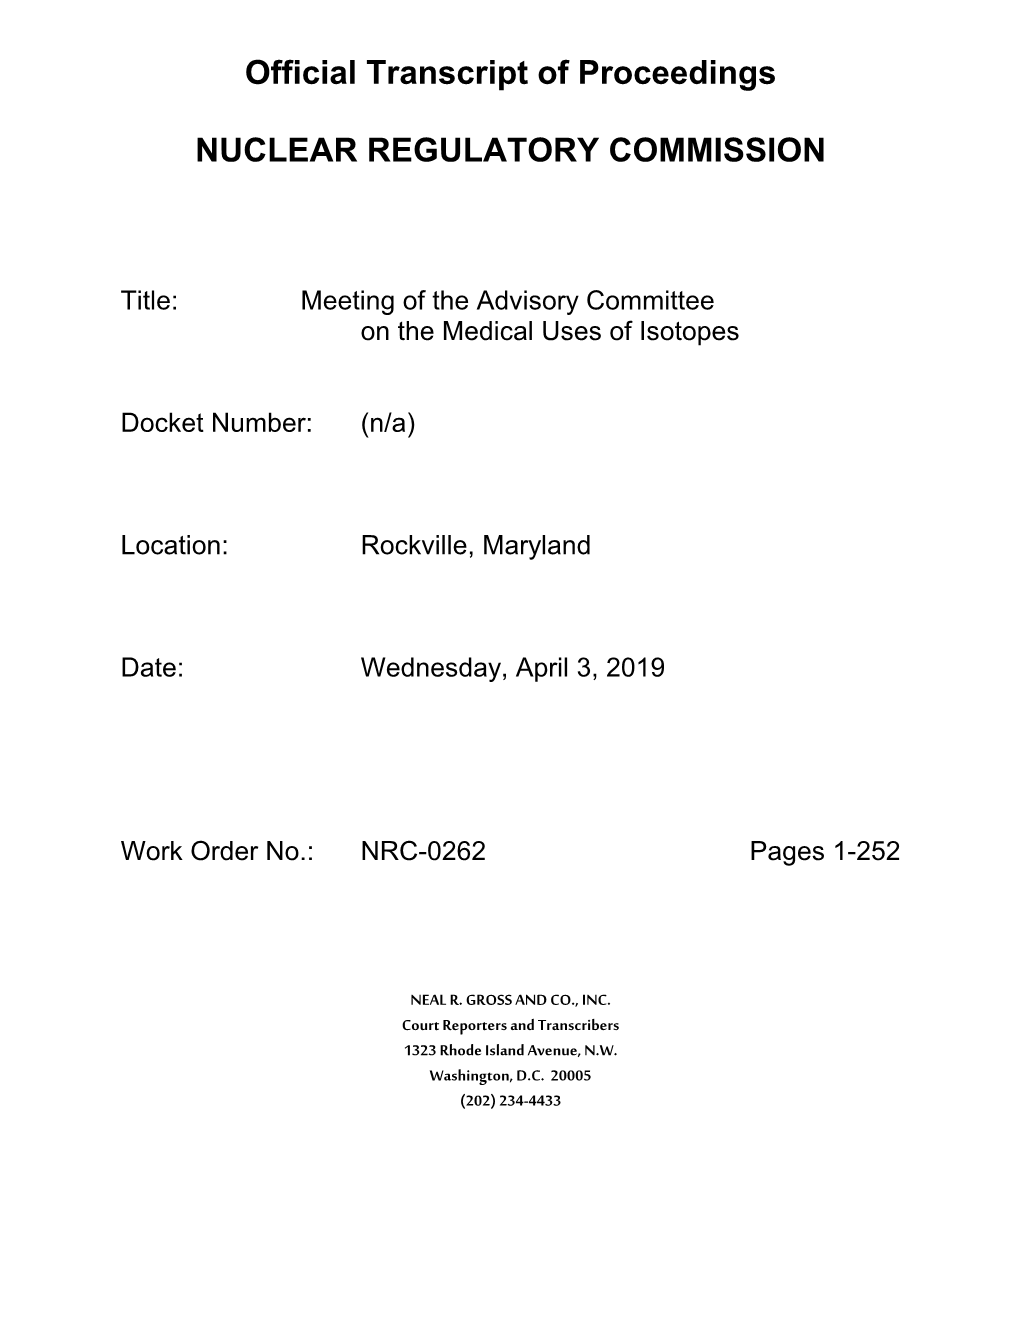 Final Transcript of the Advisory Committee on the Medical Uses of Isotopes